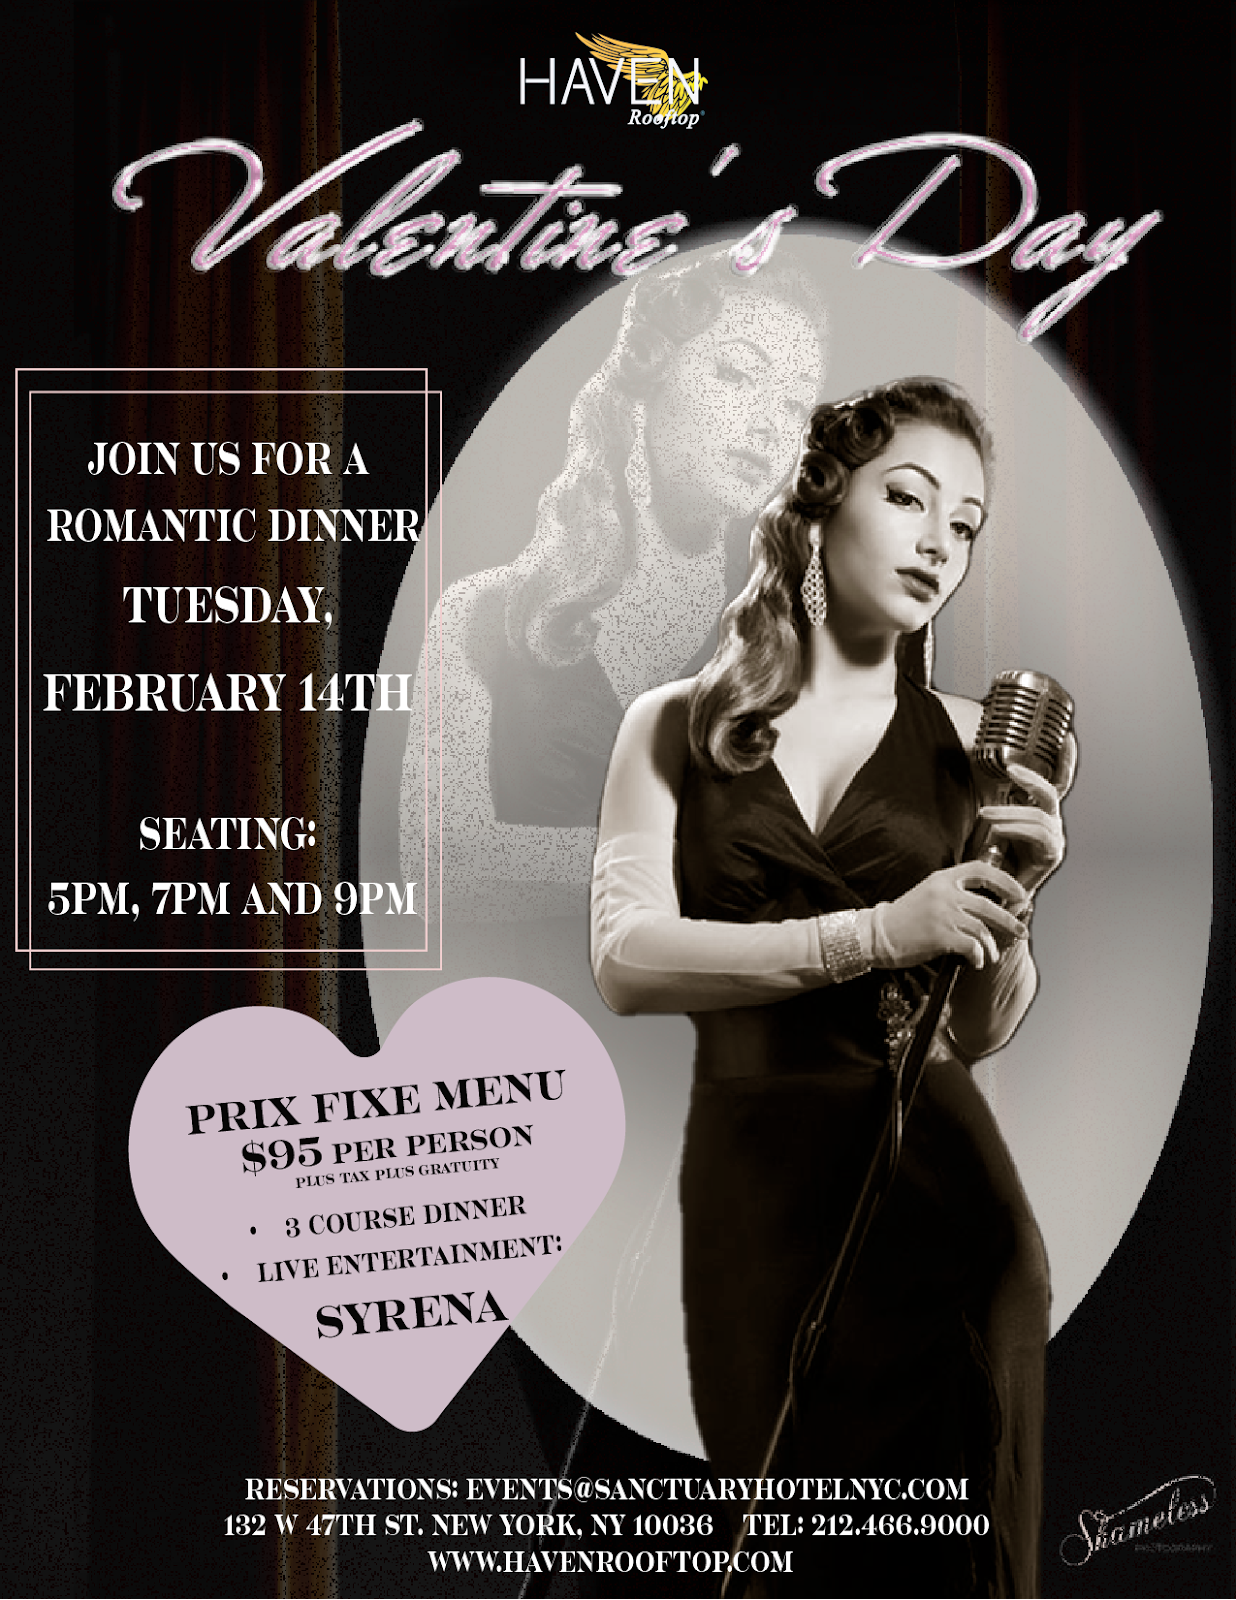   Haven Rooftop  (132 West 47th St.) is hosting a sultry Valentine’s Day evening in the sky with a delicious prix fixe menu for $95 per person and live entertainment all evening long! Couples can enjoy a romantic 3-course dinner on Tuesday evening, w